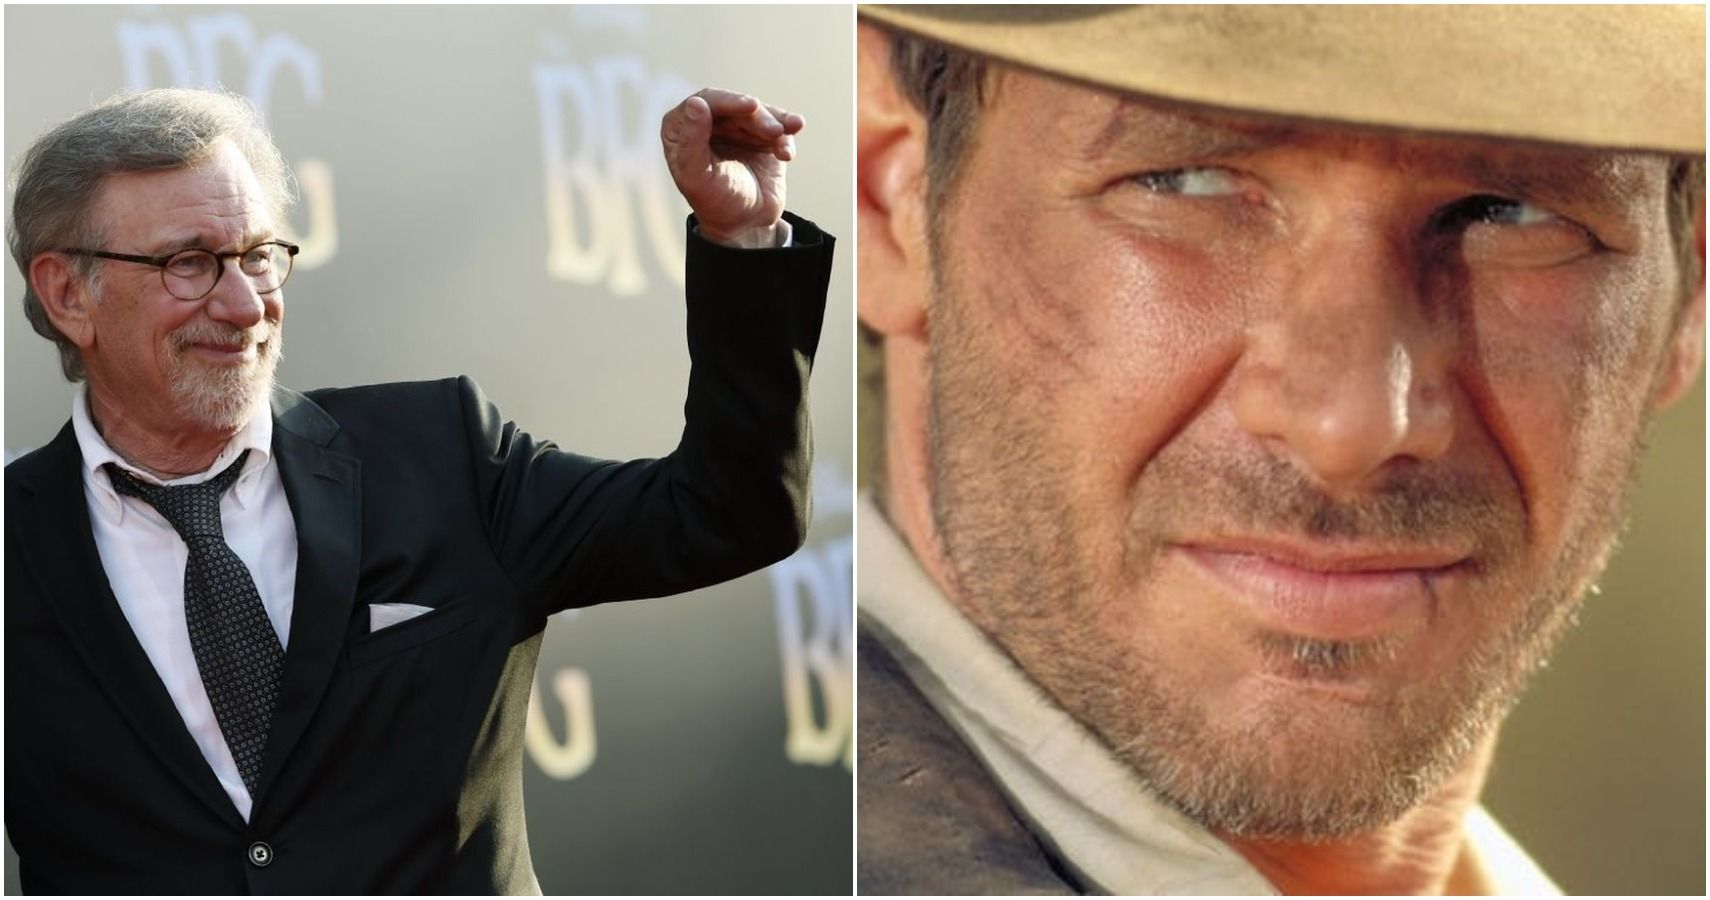 Everything We Know (So Far) About Indiana Jones 5